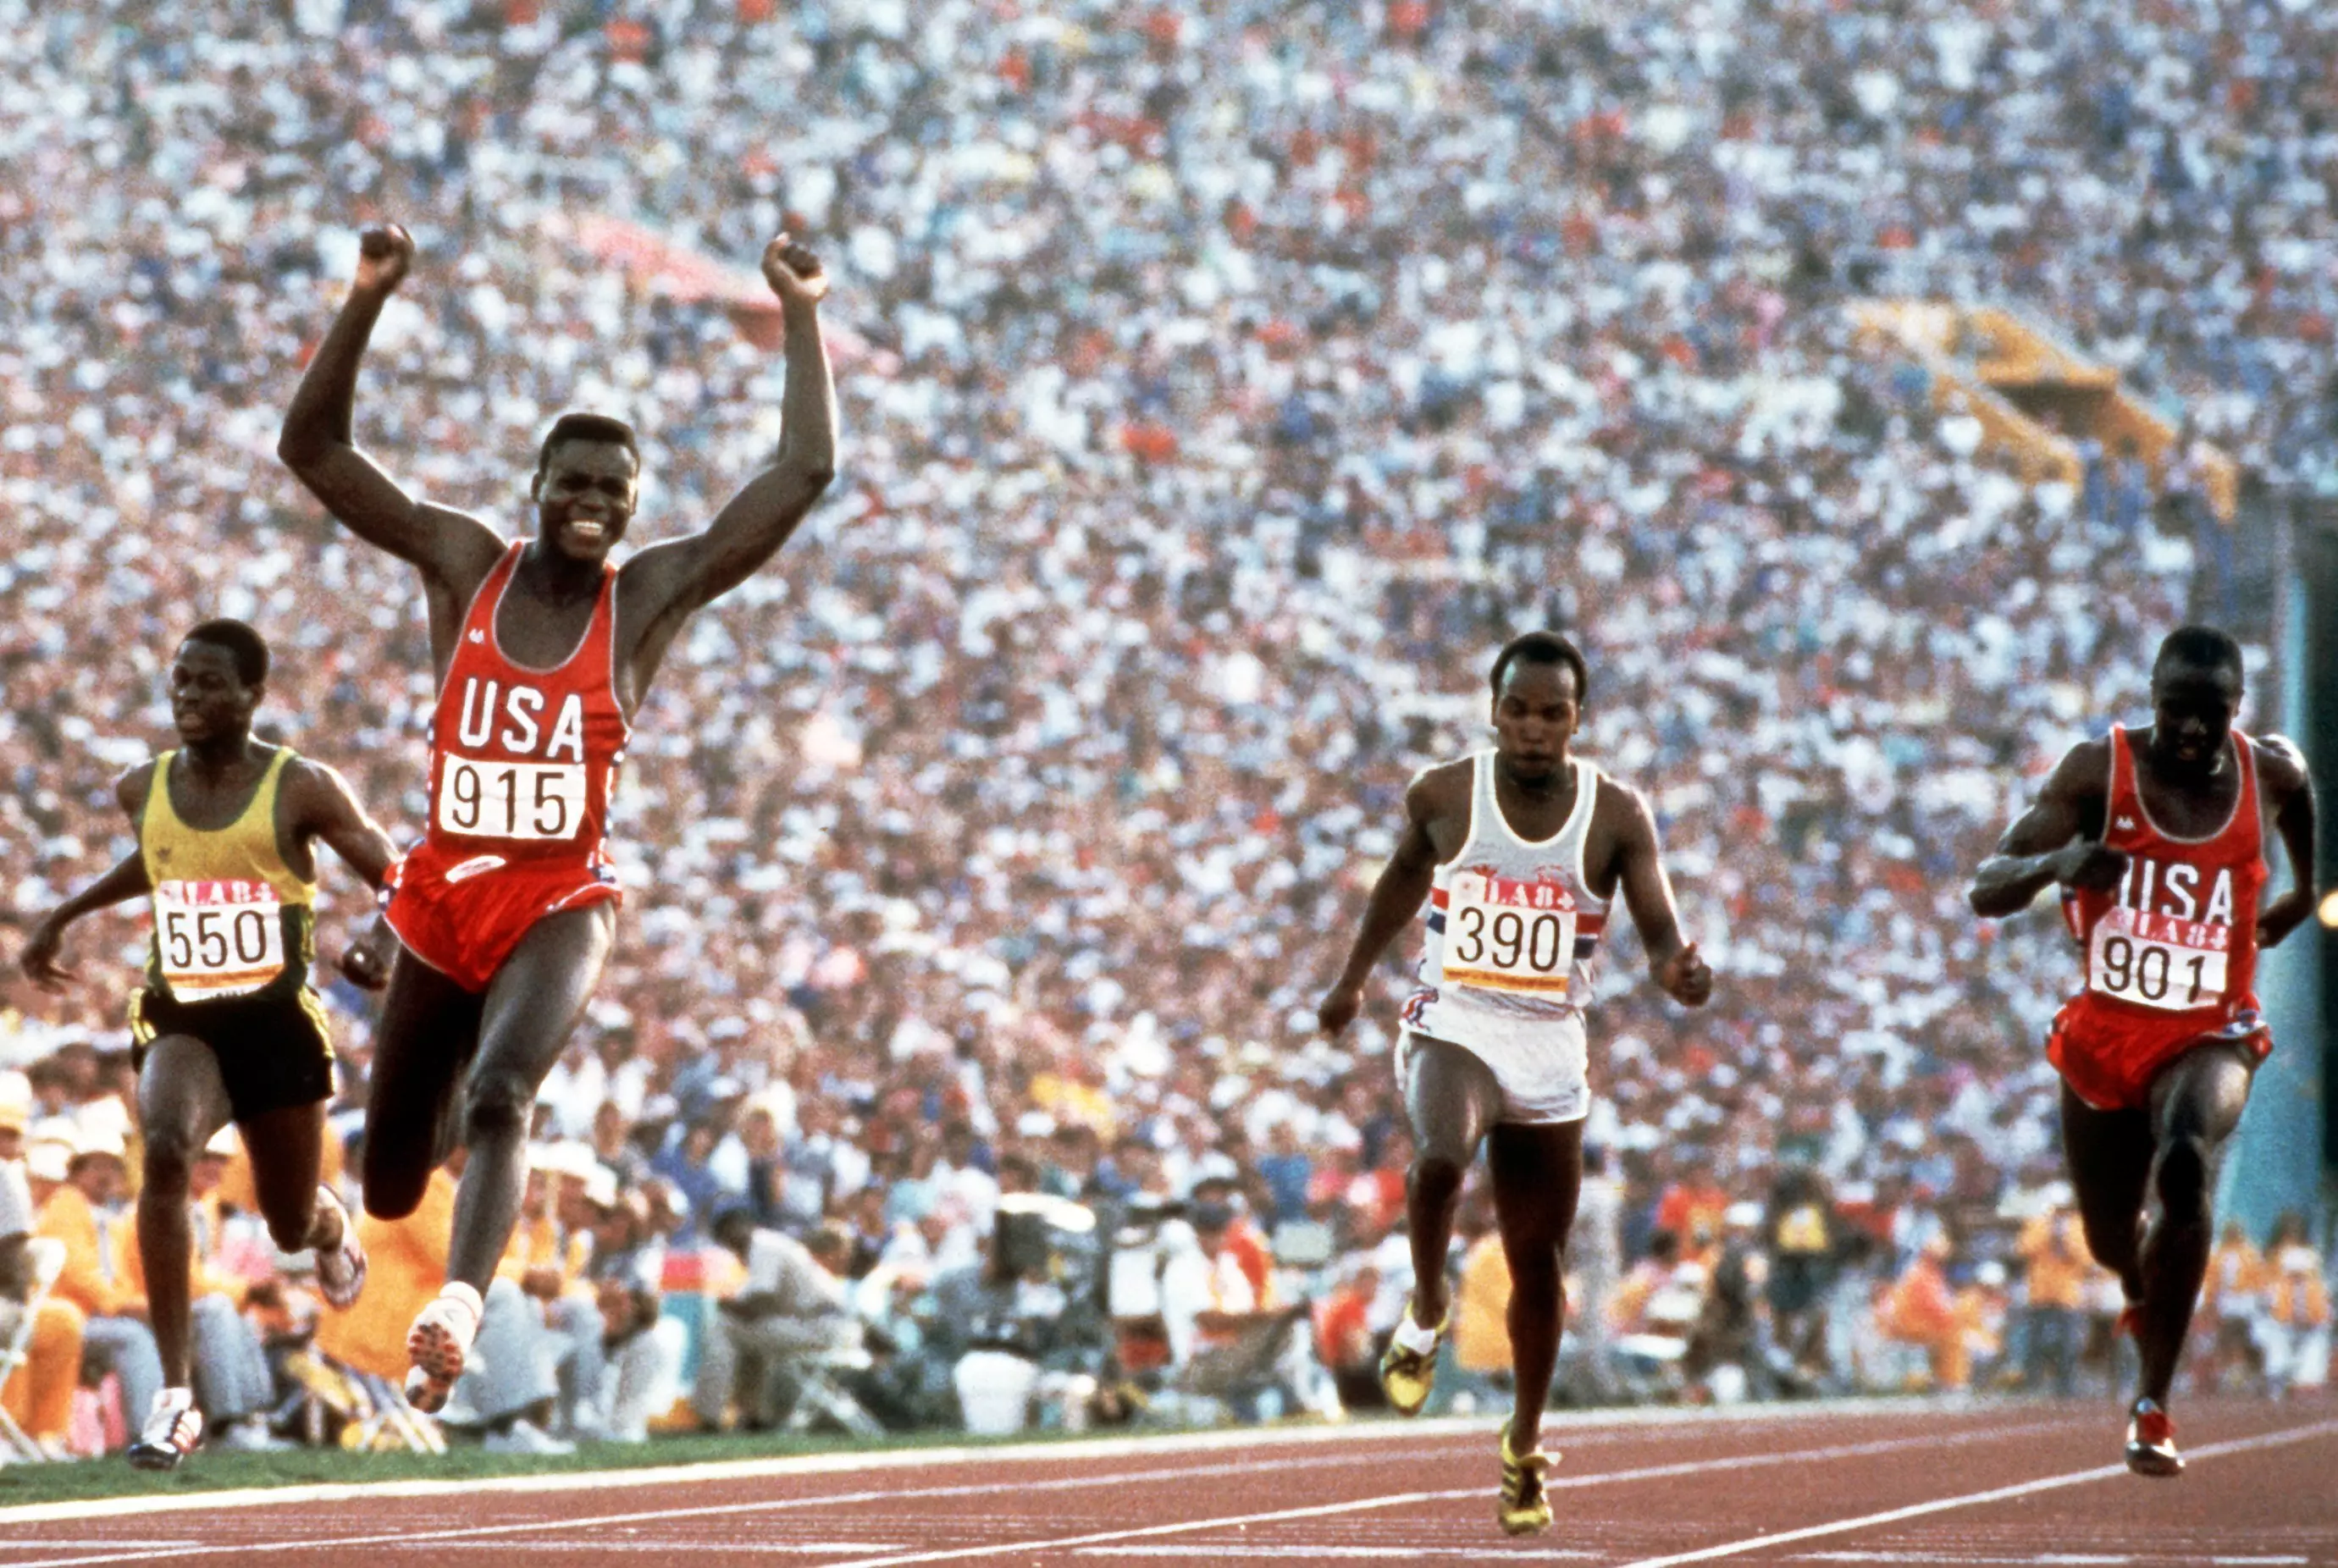 Carl Lewis pictured at the 1984 Games in LA.